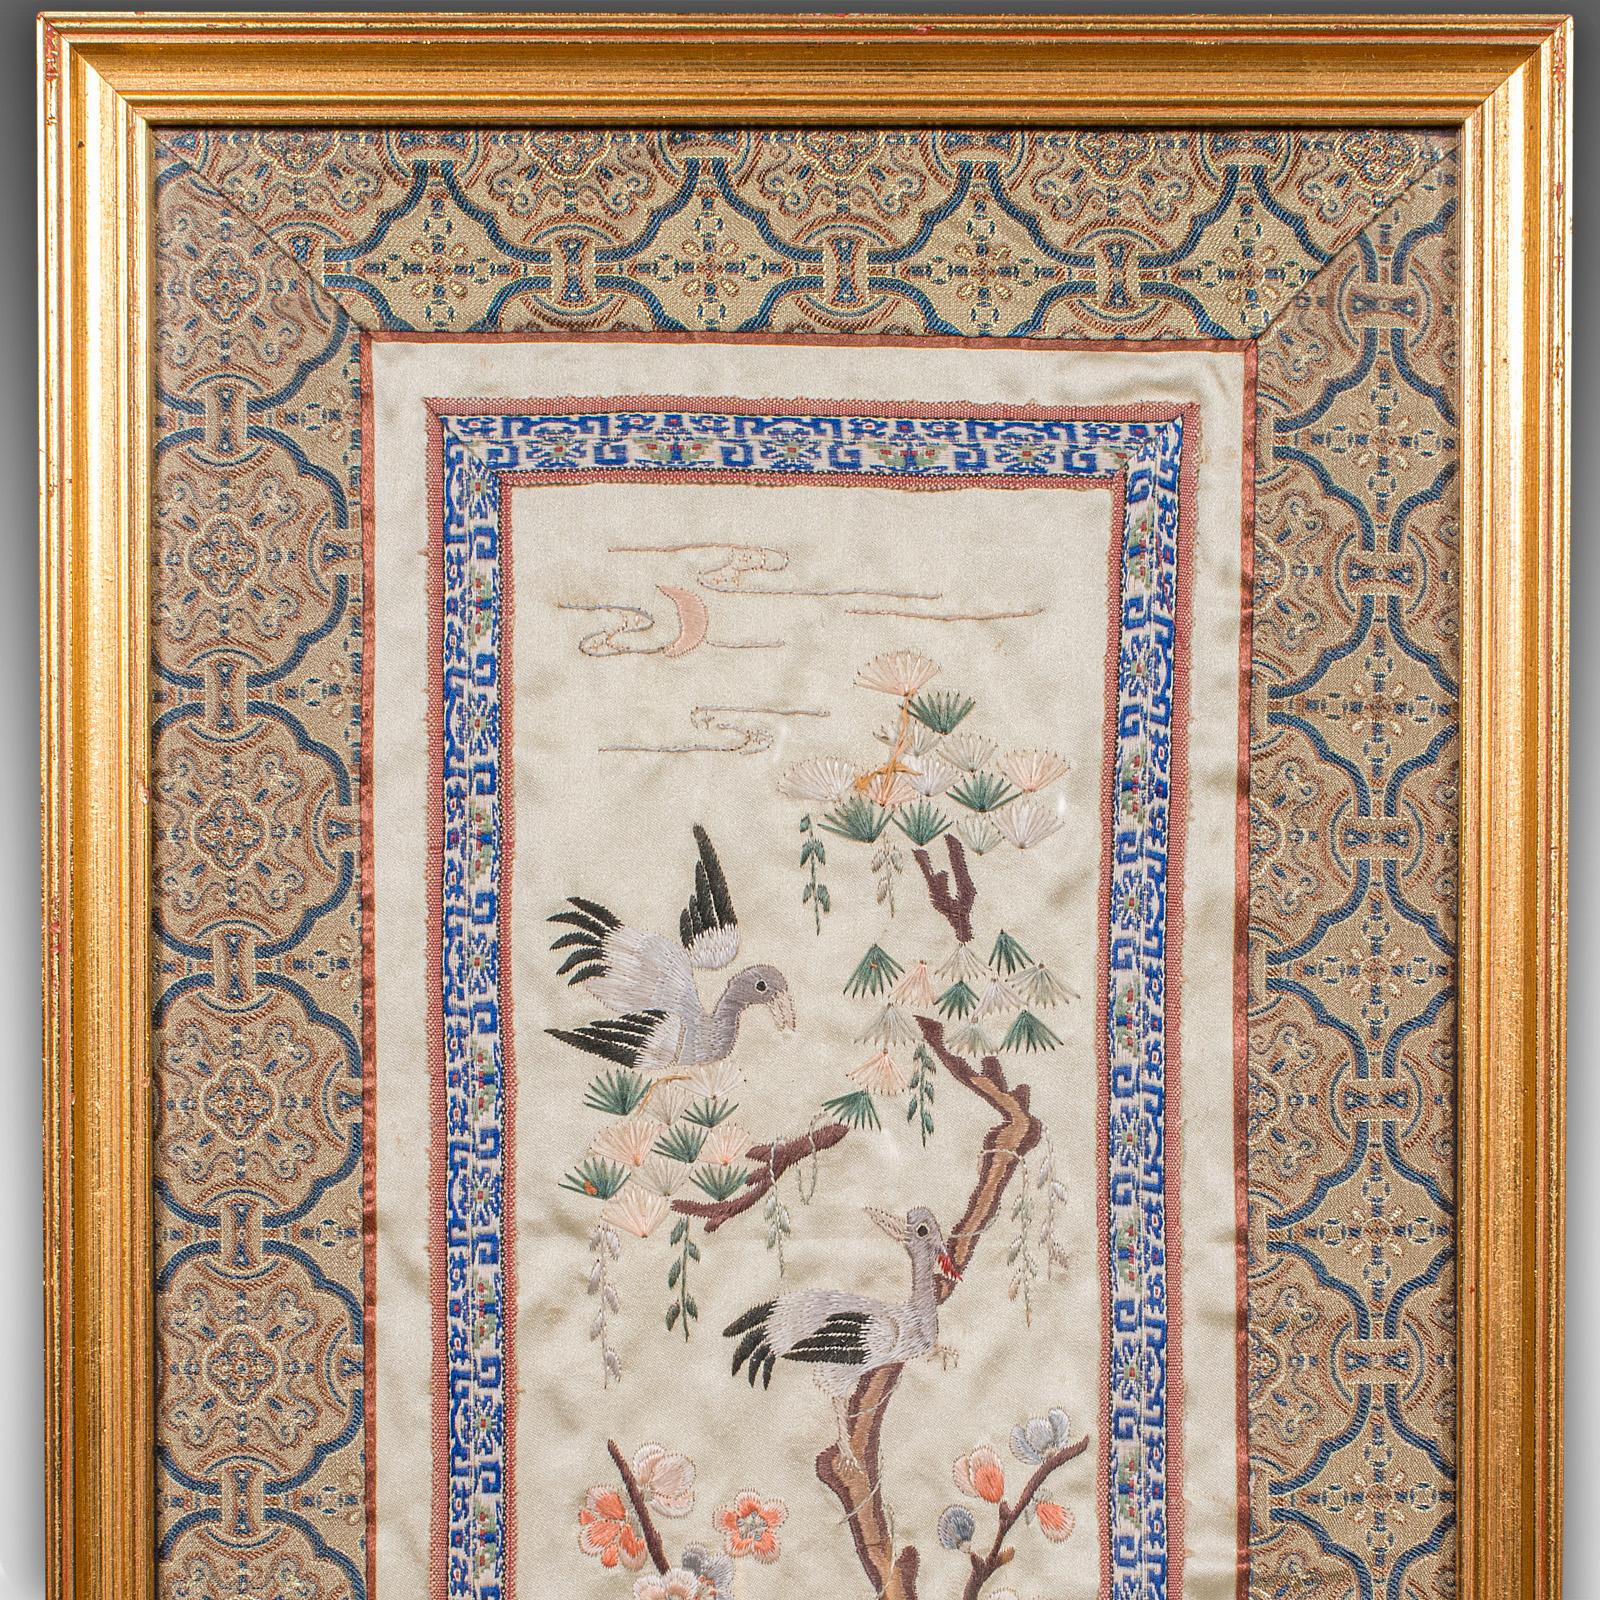 Antique Decorative Panel, Japanese, Framed, Silk Cotton Embroidery, Victorian In Good Condition For Sale In Hele, Devon, GB